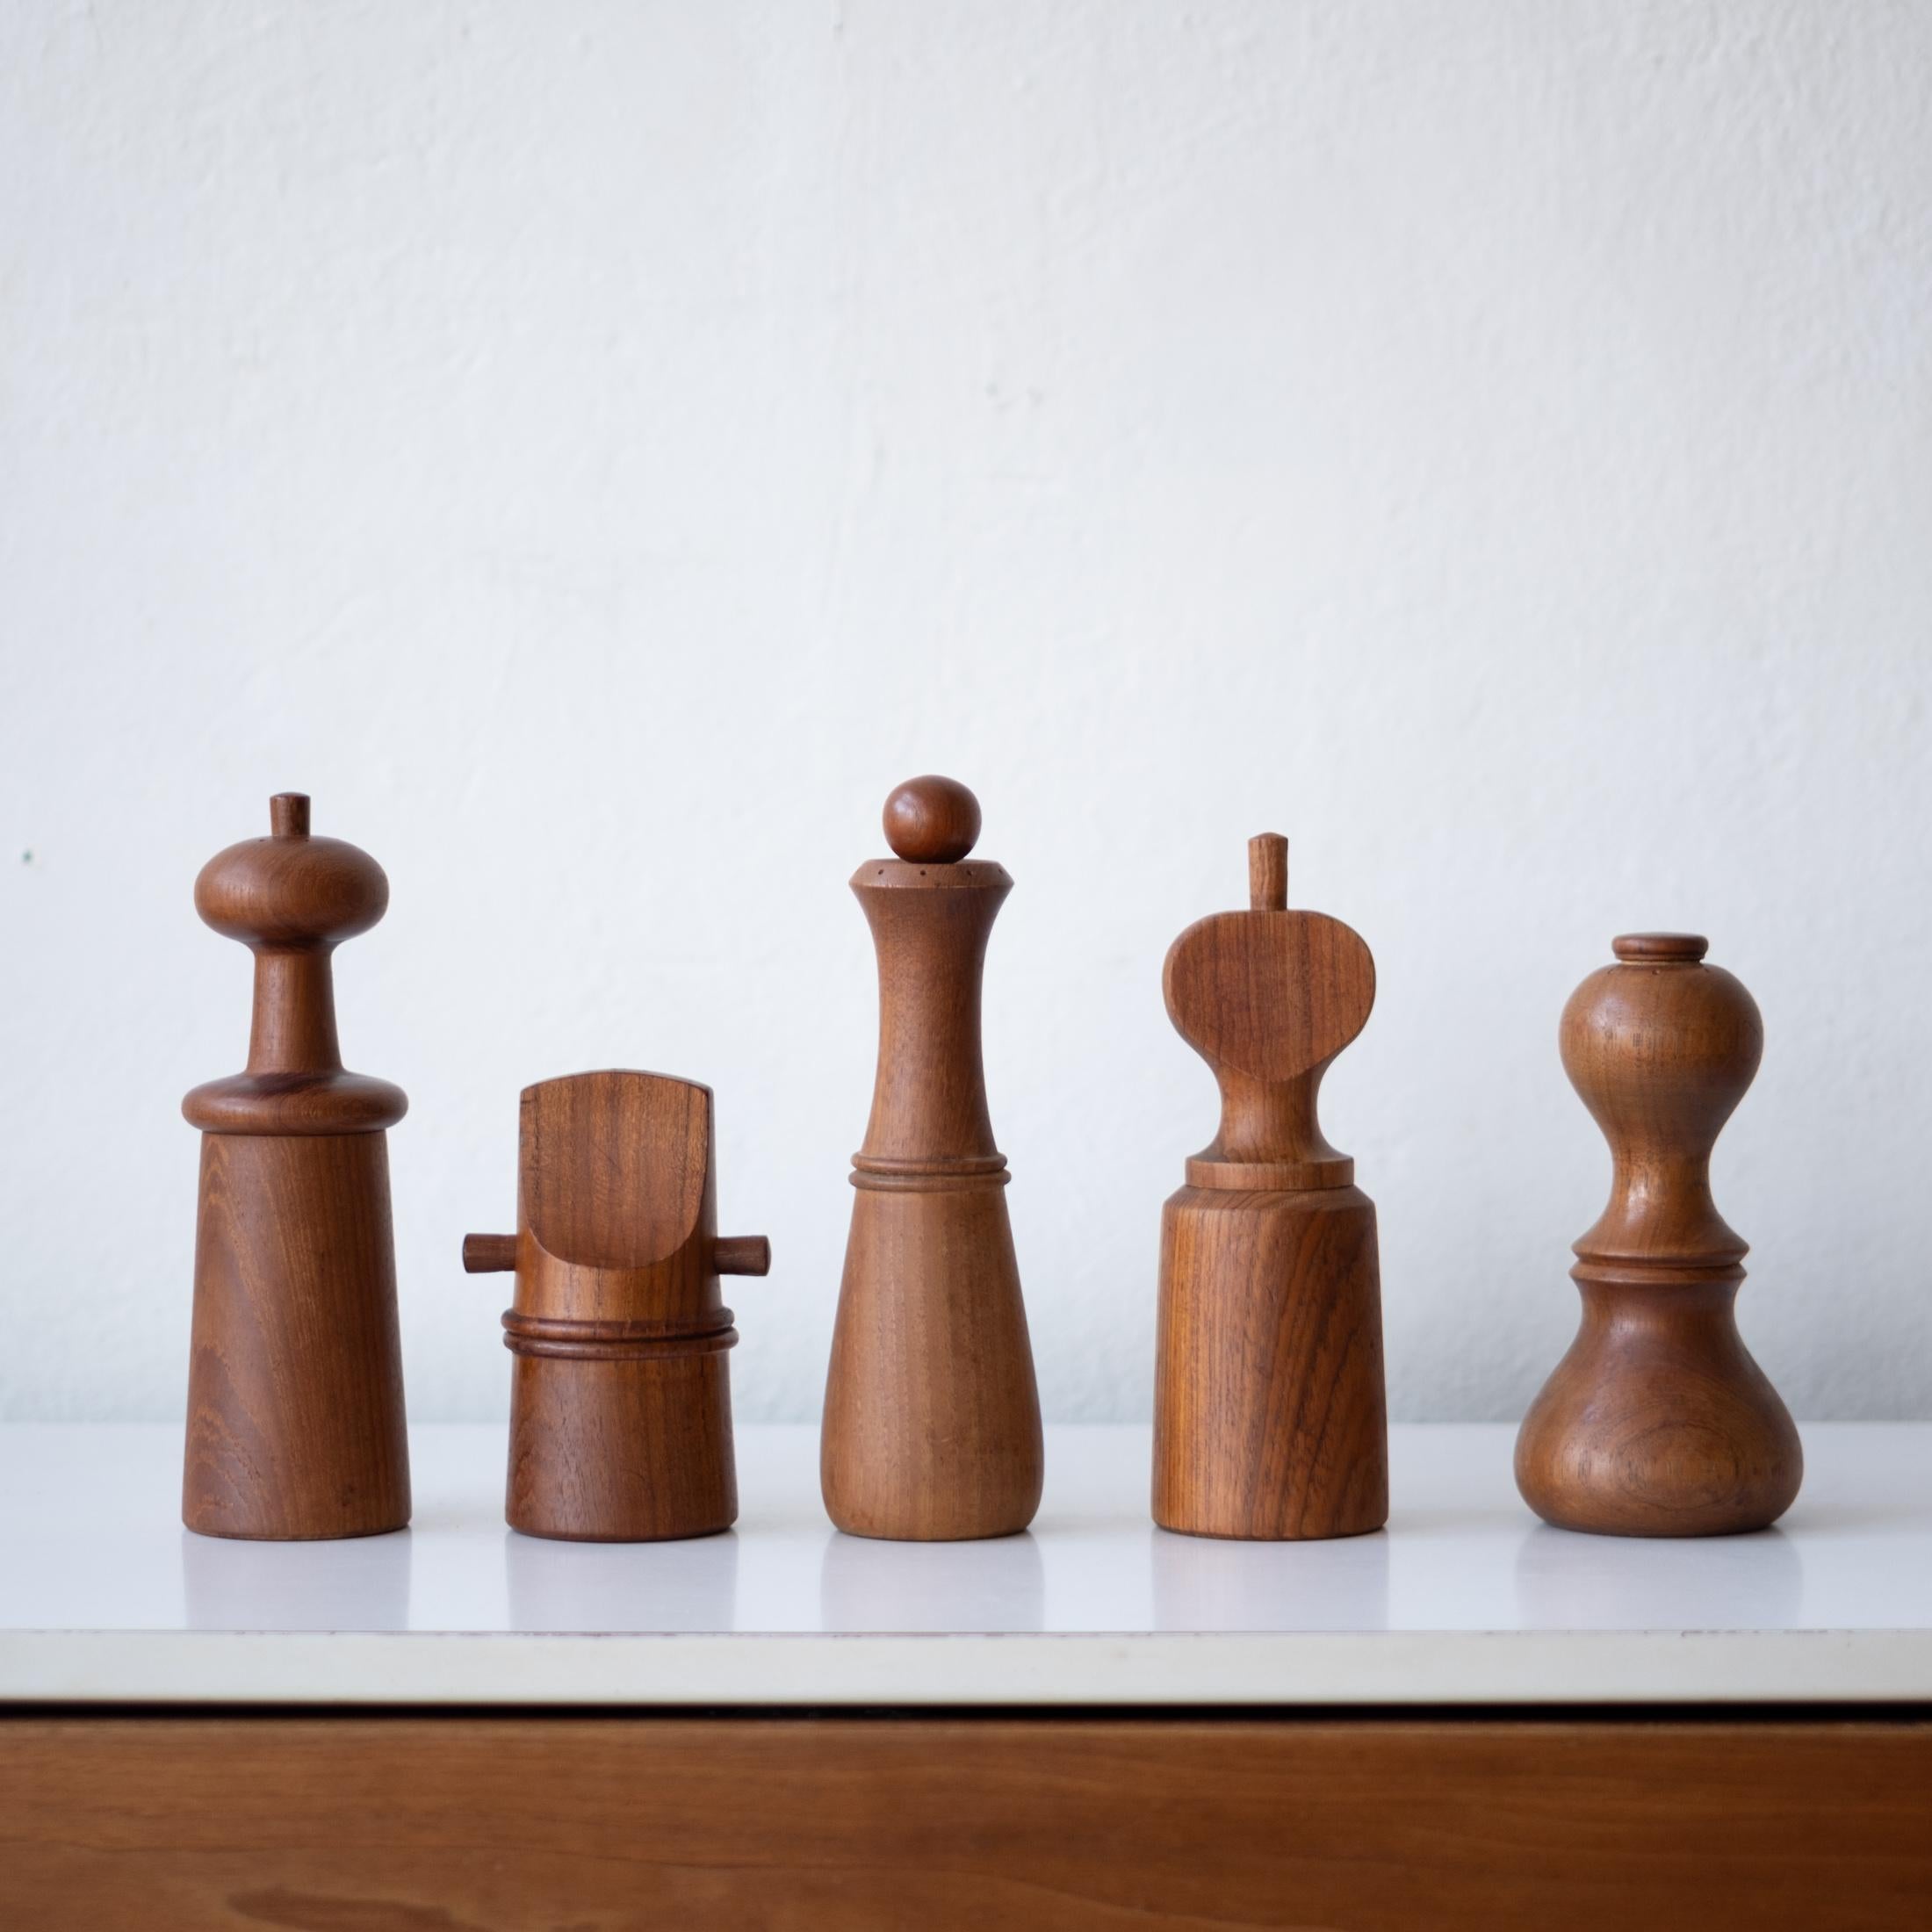 Collection of five teak pepper mills by Jens Quistgaard. All mills were produced by Dansk in Denmark. circa 1960s.